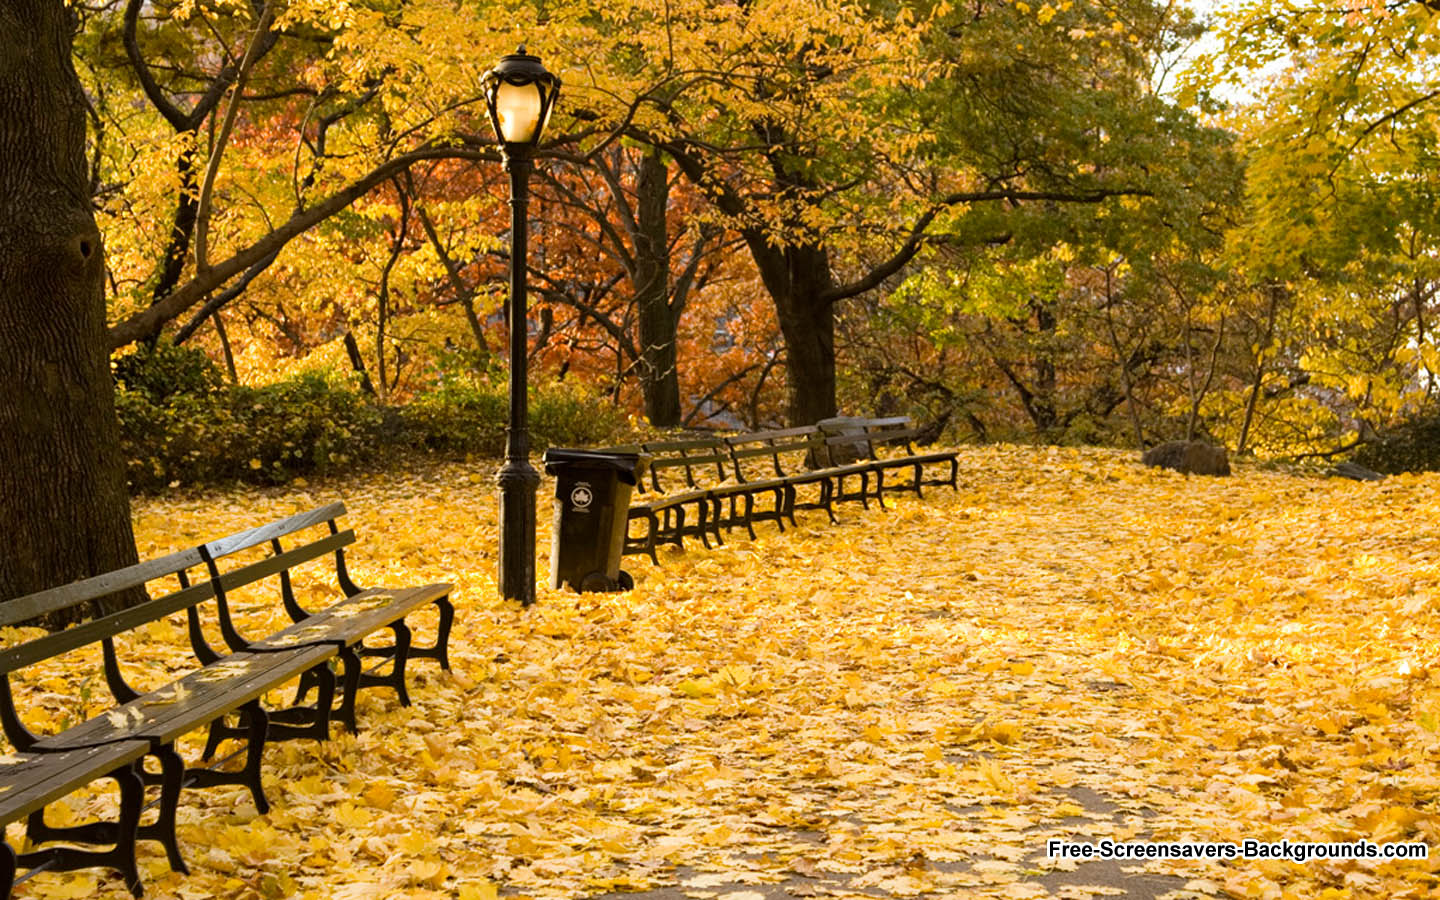 Autumn   Free Screensavers and Backgrounds